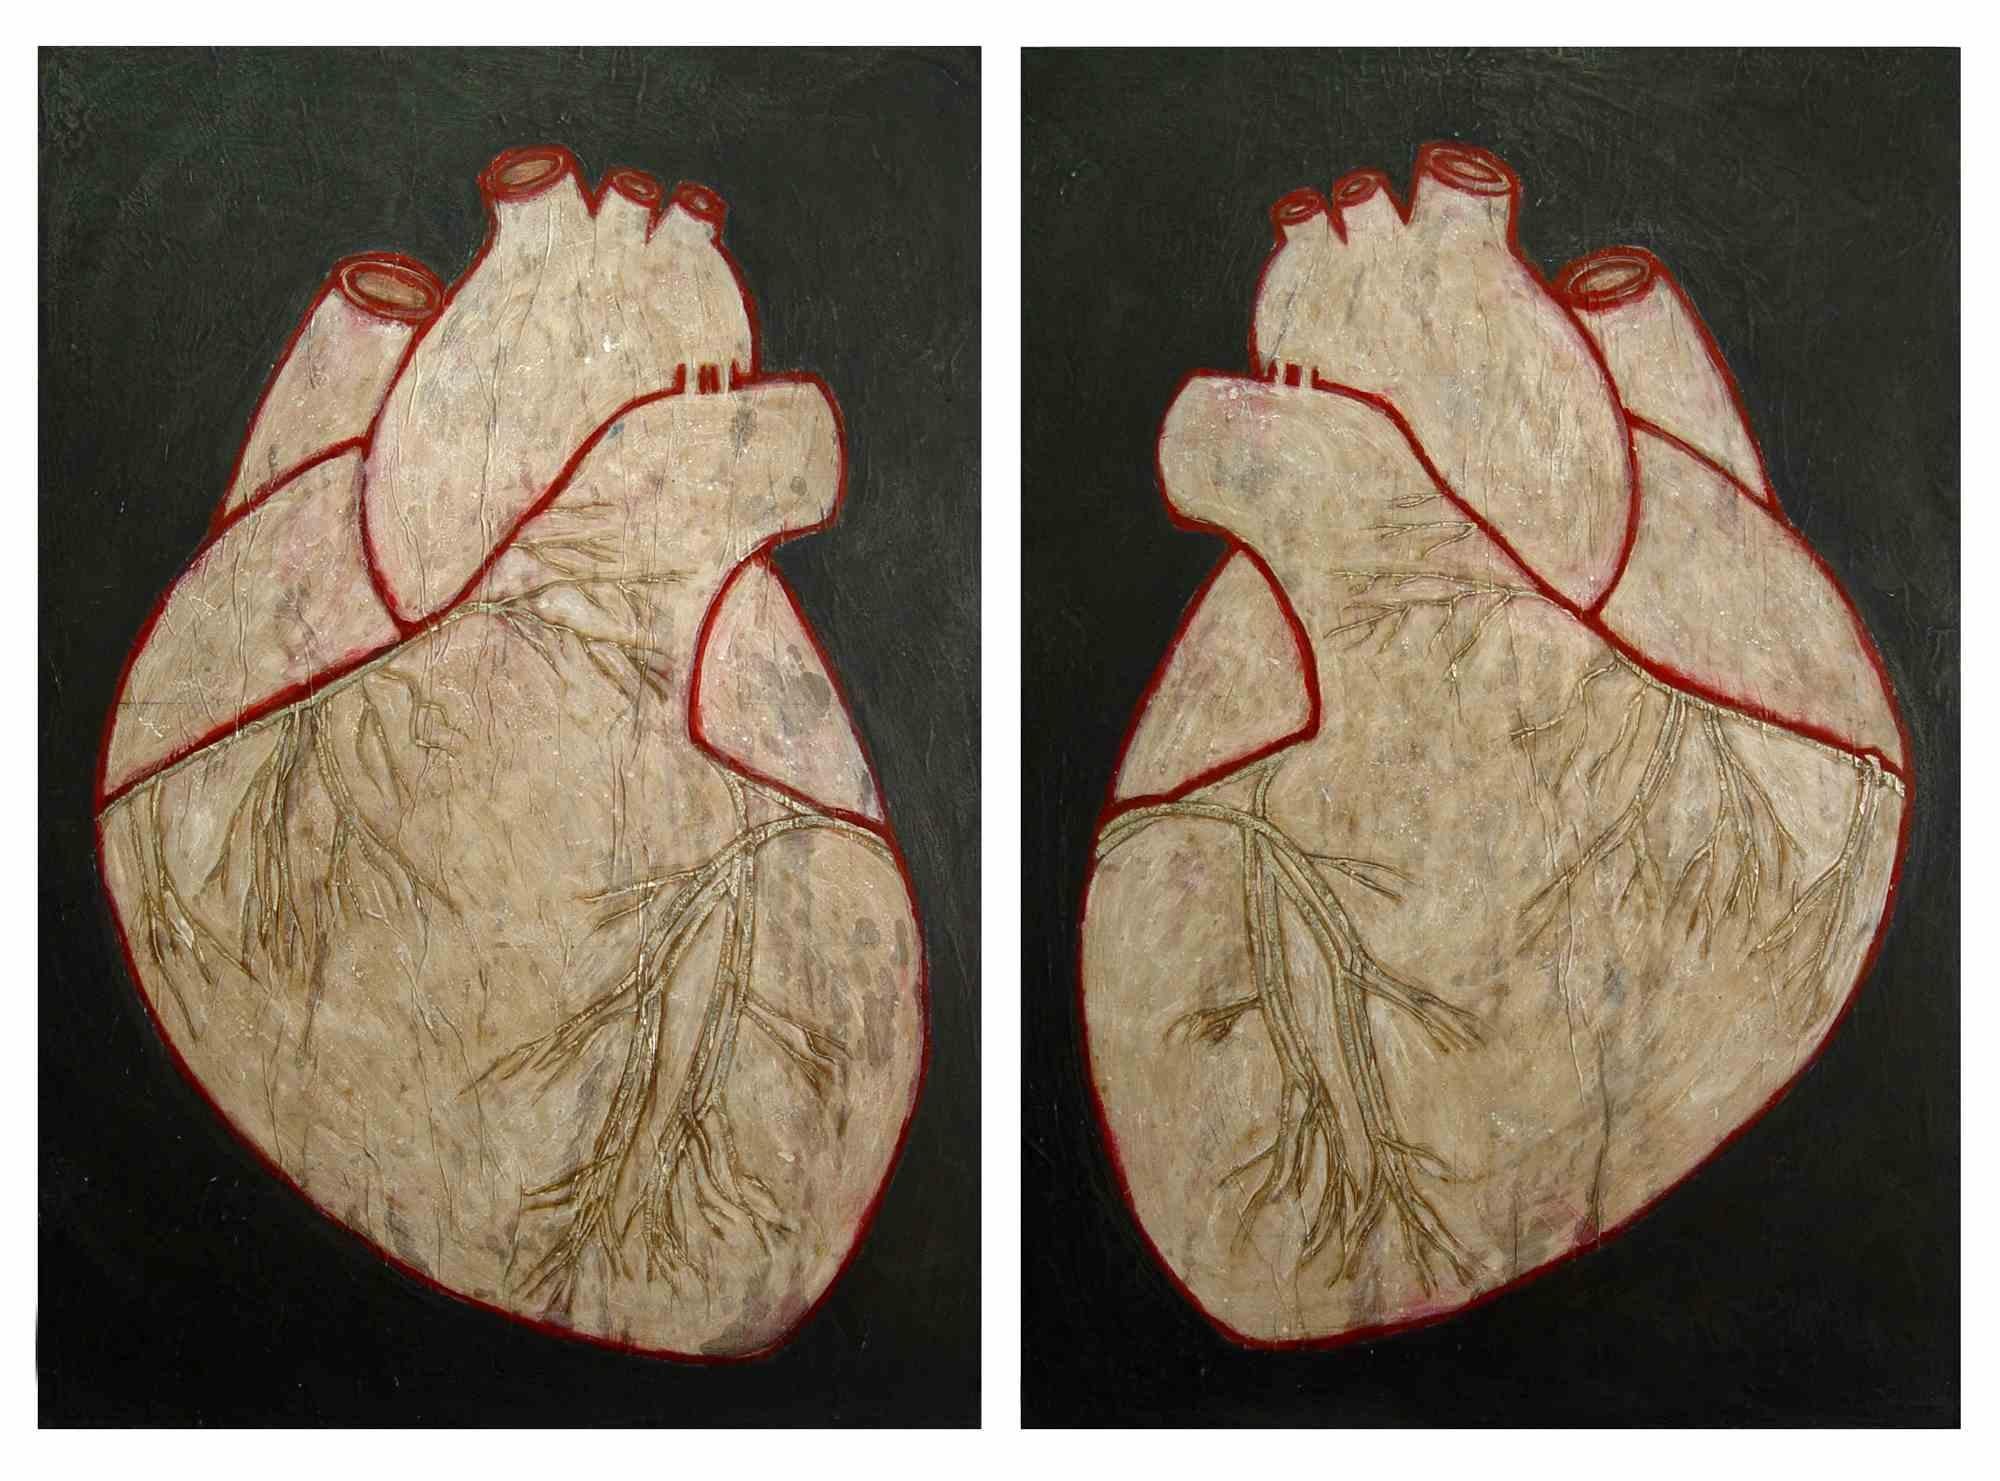 Face to Face (Hearts) is an original painting realized by the Italian artist Salvatore Travascio in 2012.

This beautiful artwork is a diptych in acrylic paint and silver on paper on a wooden support. Hand-signed. Perfect conditions.

What has